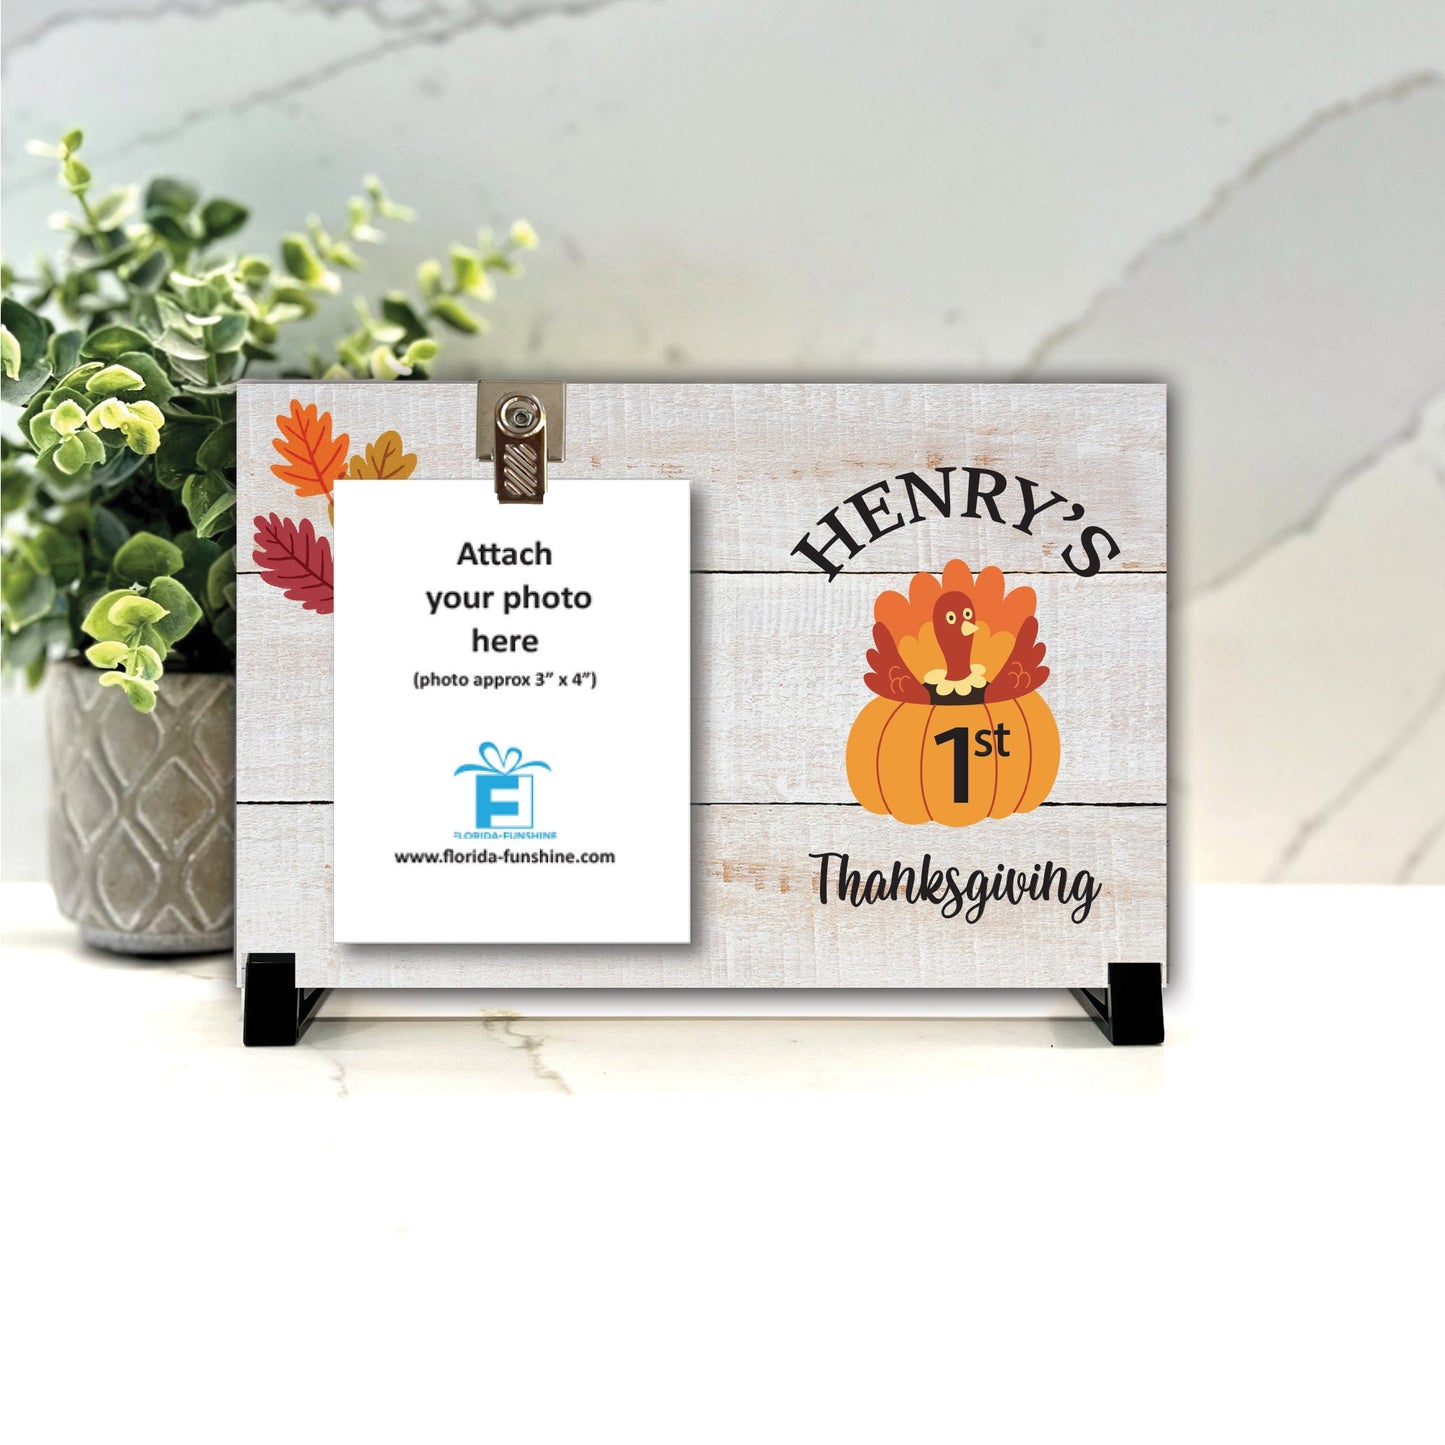 First Thanksgiving Personalized Picture Frame, First Thanksgiving Frame, Baby's first thanksgiving, First Thanksgiving picture frame 2023